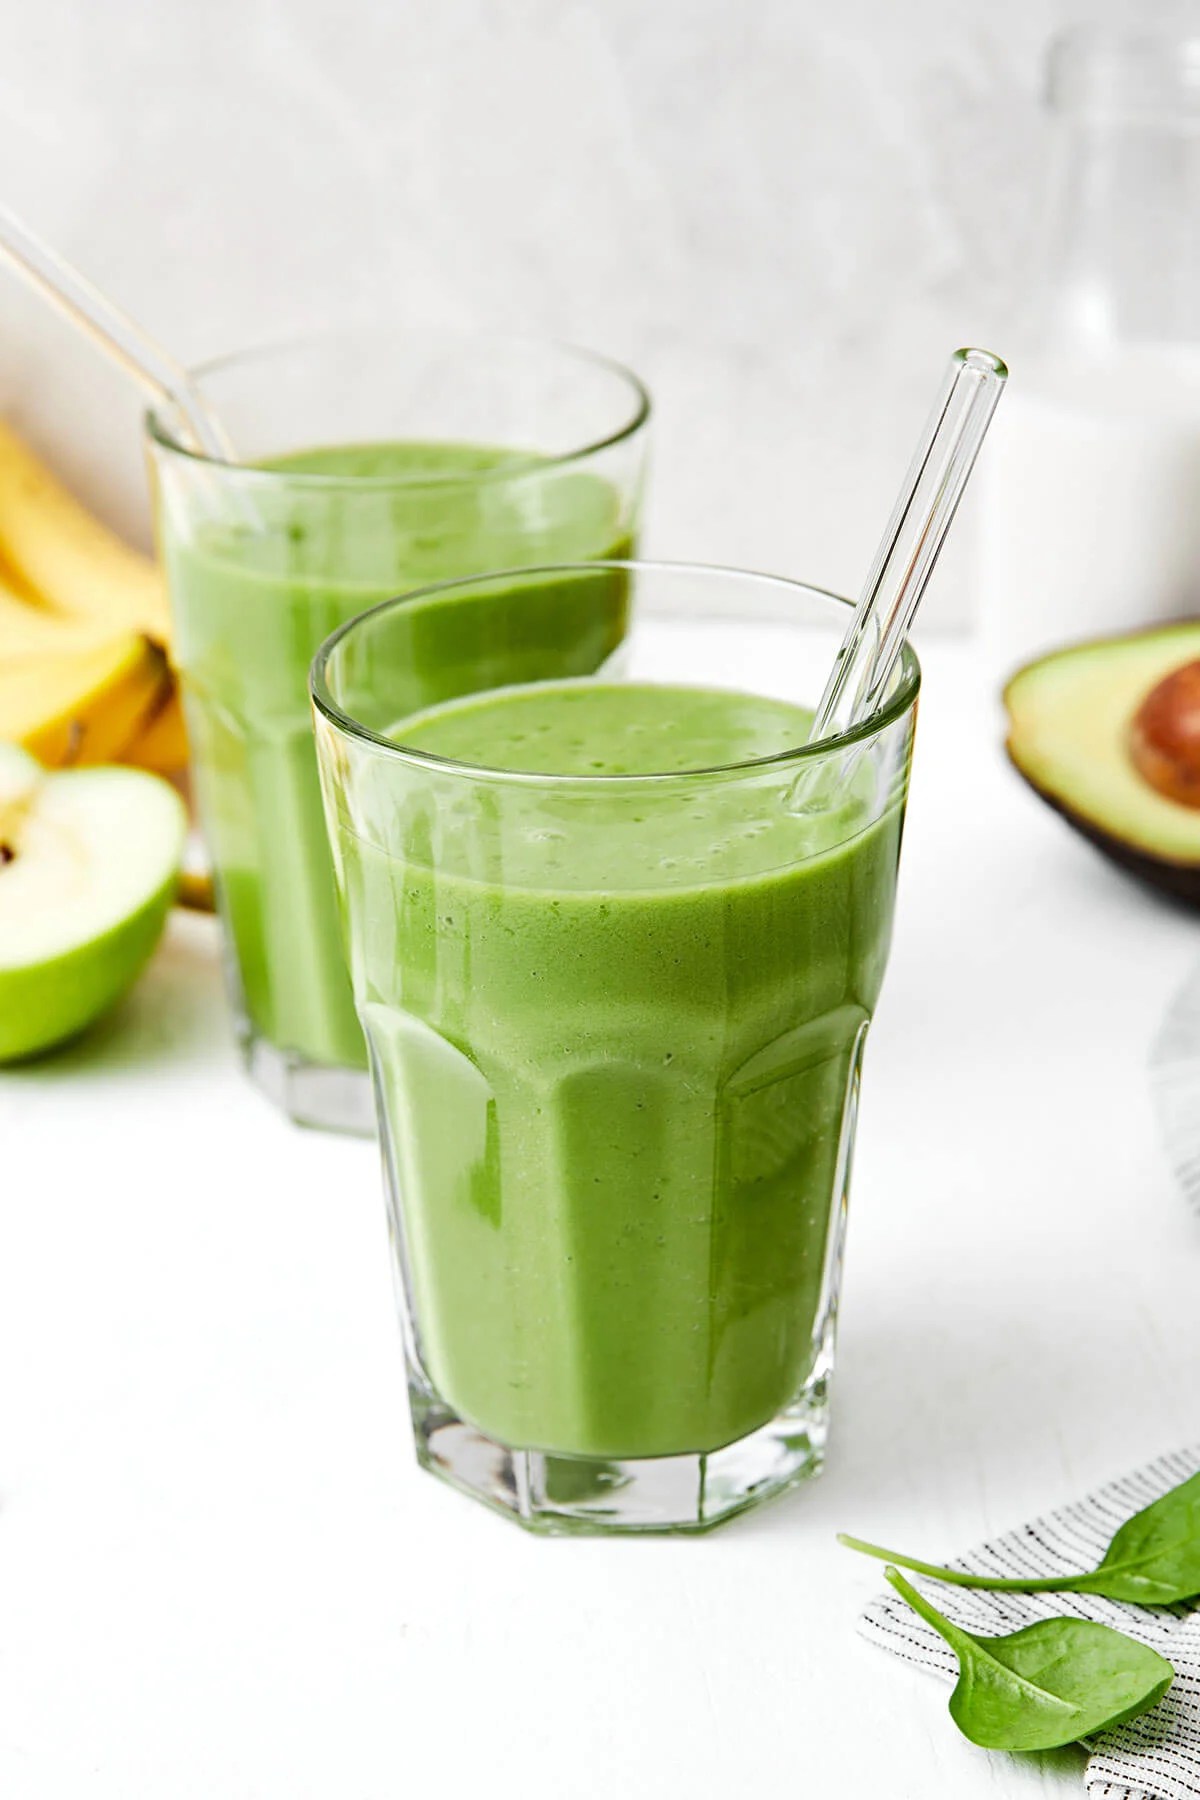 Glasses of green smoothie.